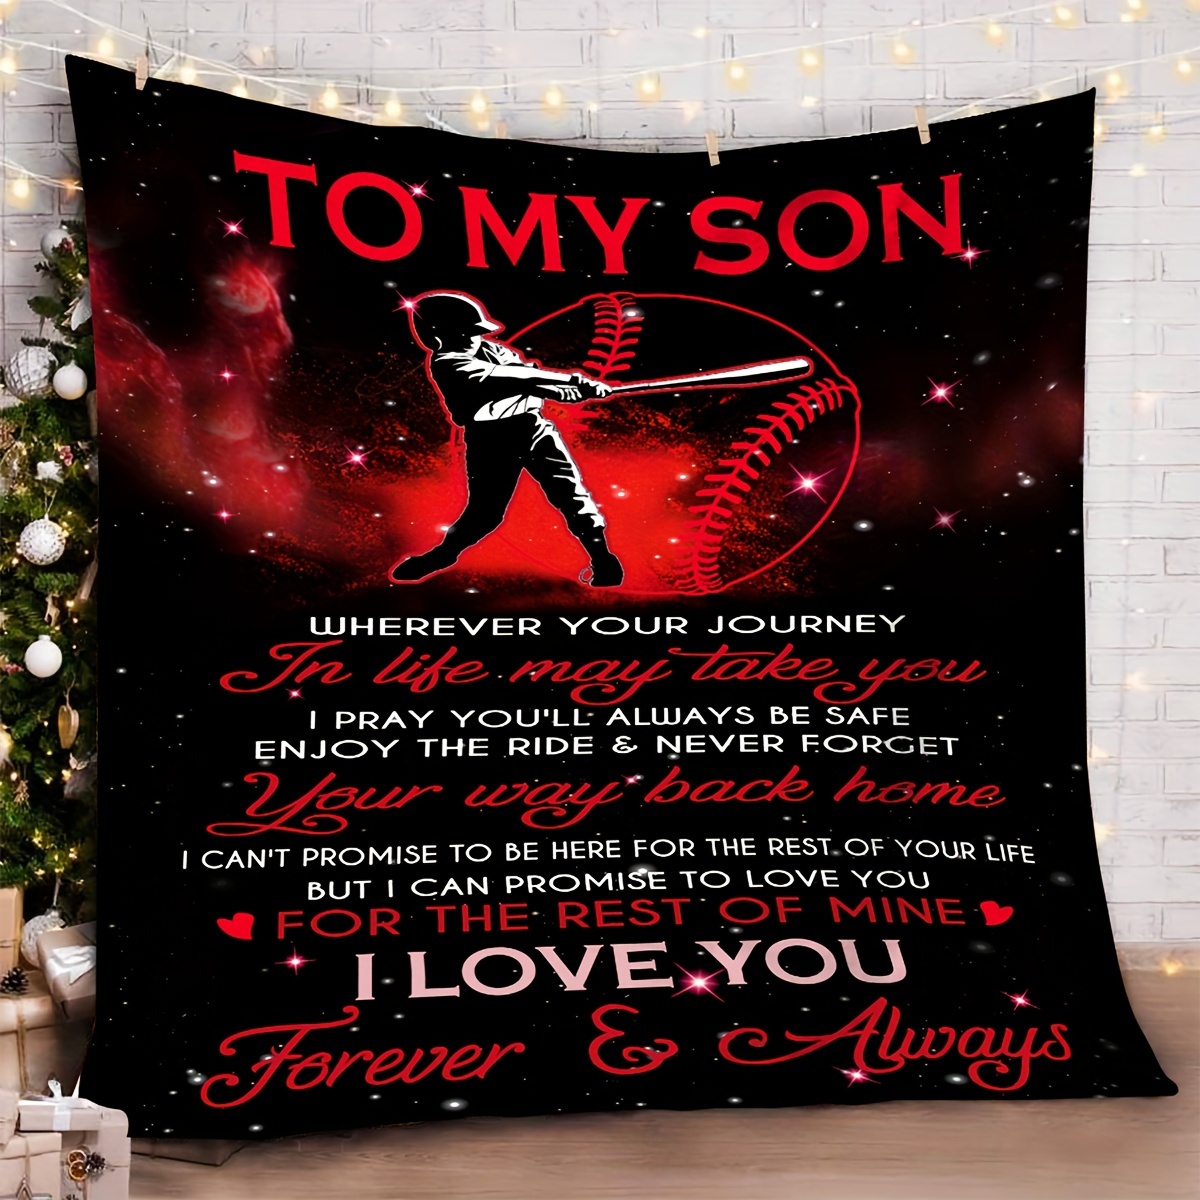 

1pc Gift Blanket For Son Creative Text Baseball Pattern Soft Blanket Flannel Blanket For Couch Sofa Office Bed Camping Travel, Multi-purpose Gift Blanket For All Season